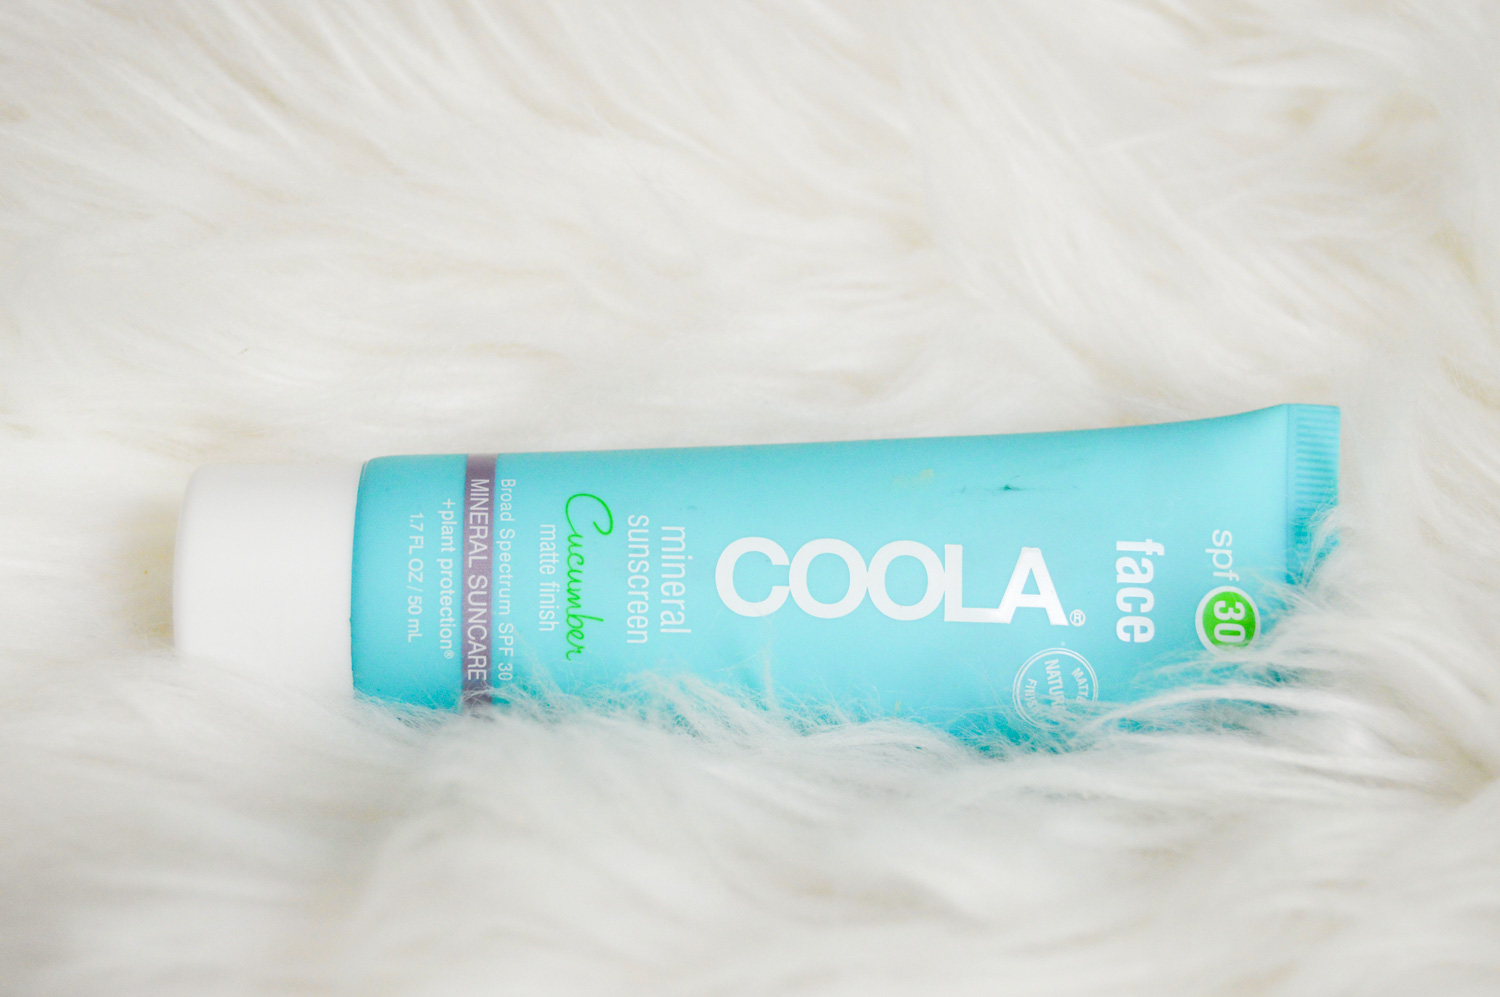 Coola sunscreen is highly recommended for its skin nourishing ingredients and weightless feel. But only if you're ready to splurge on sunscreen!